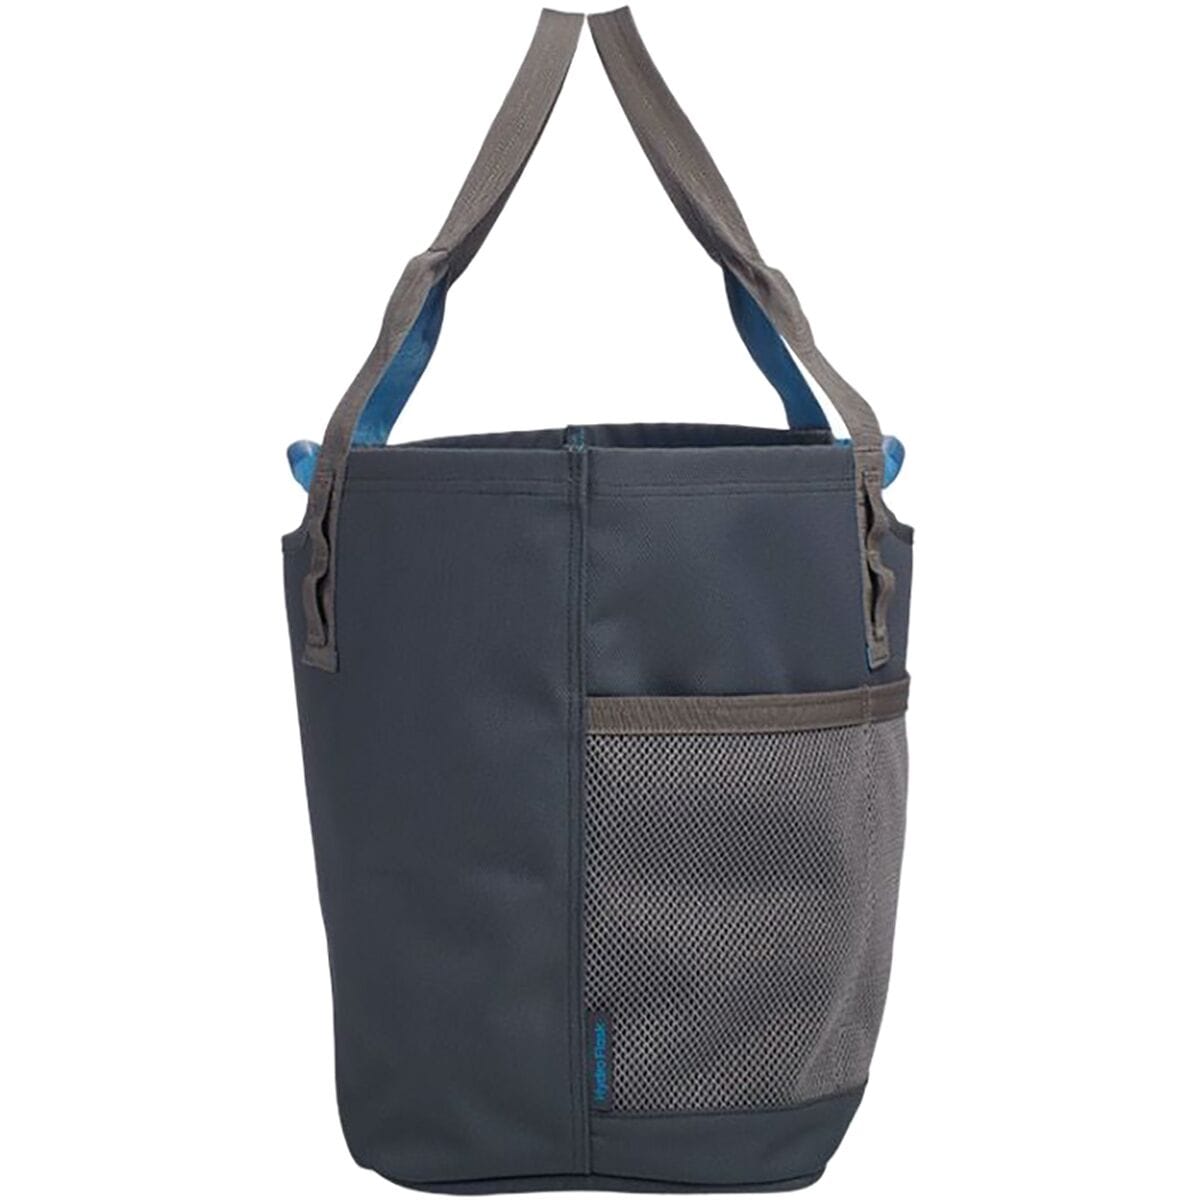  Hydro Flask 34L Outdoor Tote - Hike & Camp